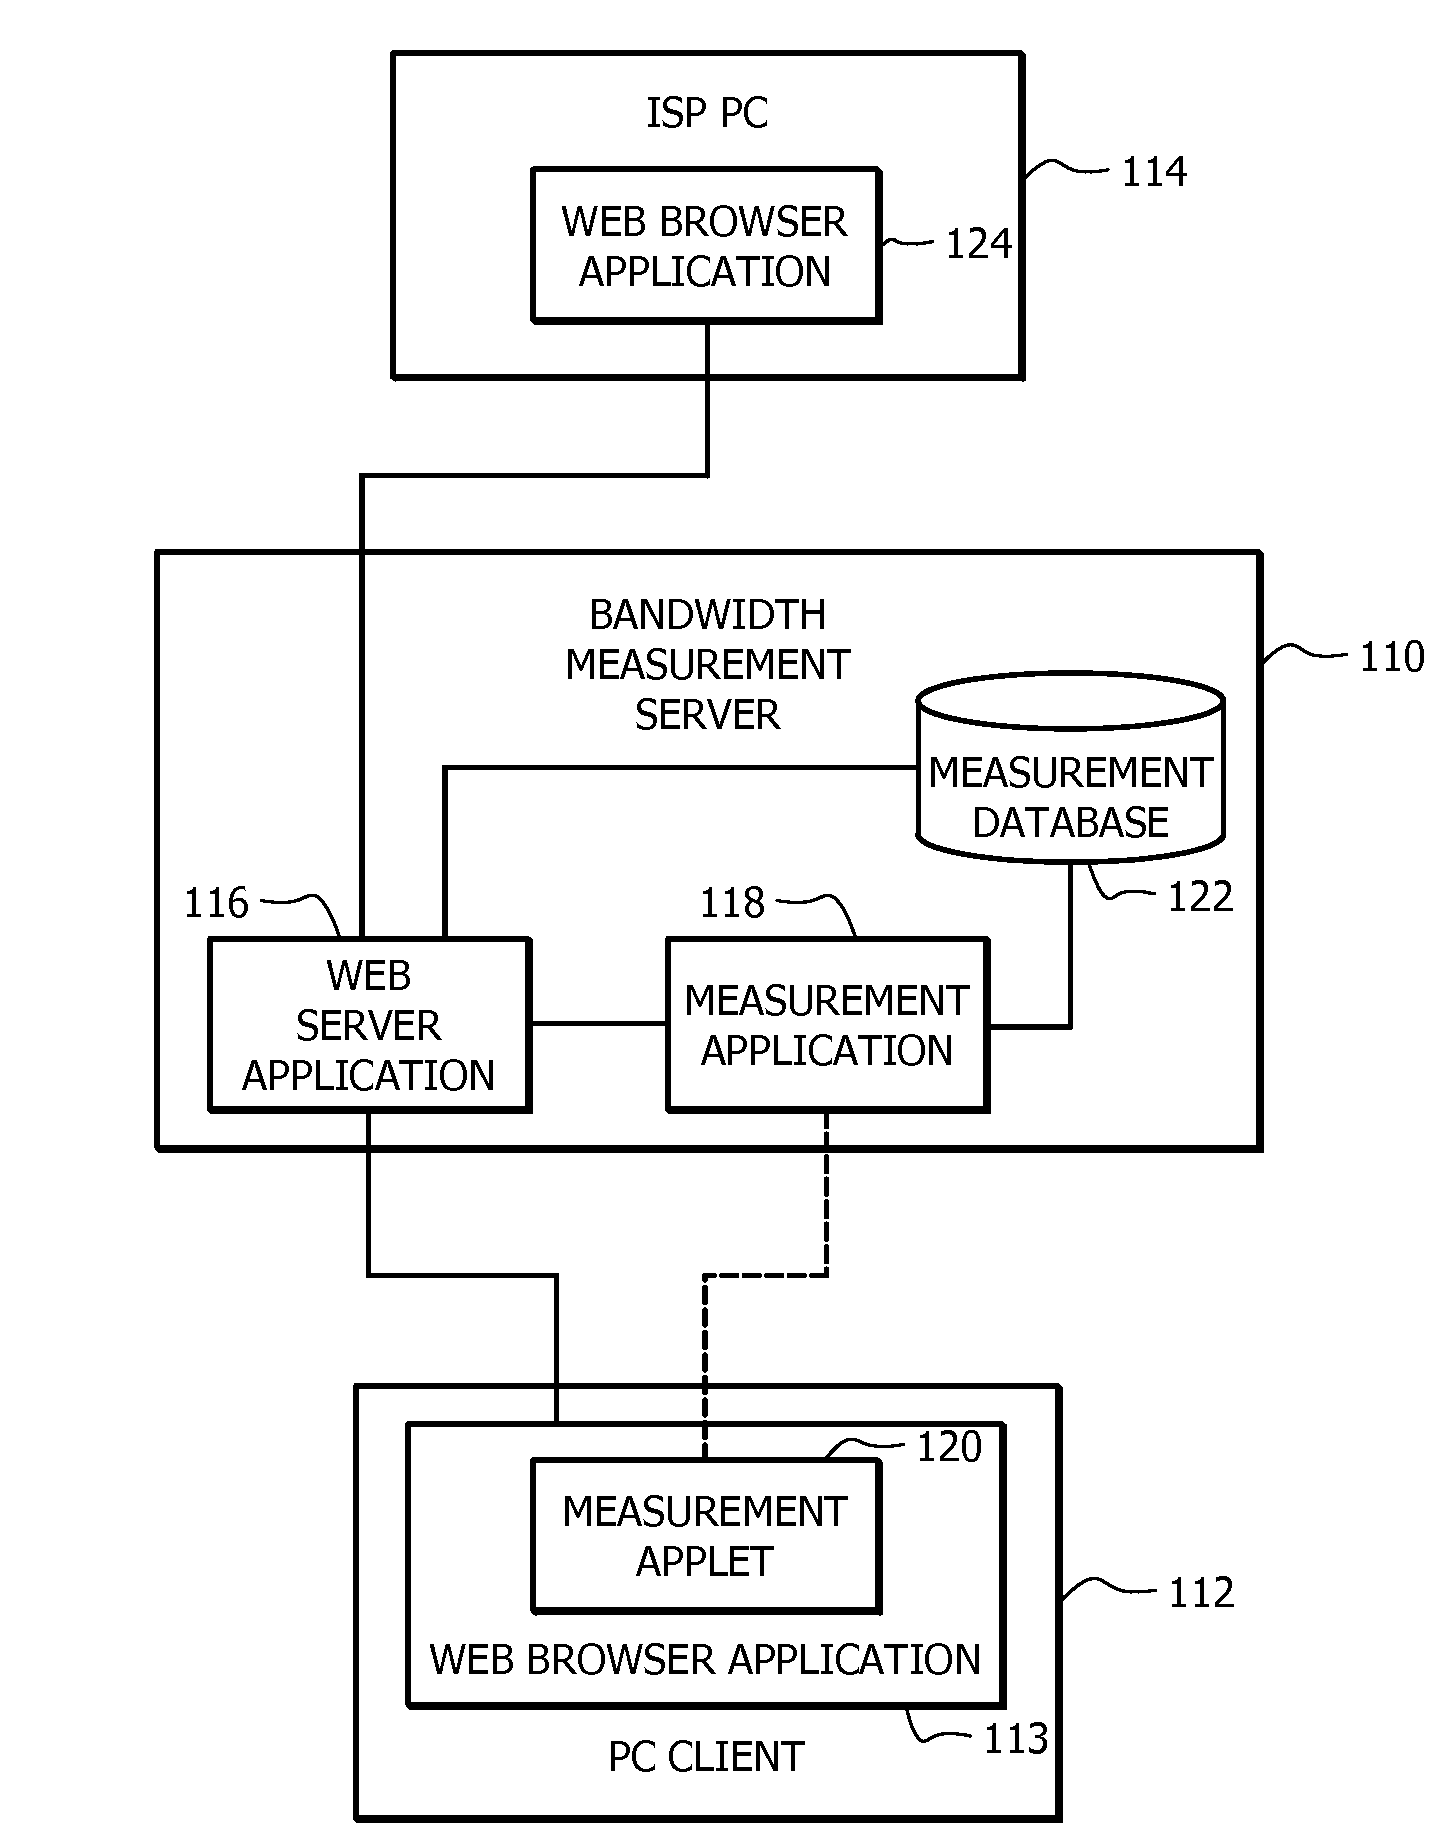 Internet service node incorporating a bandwidth measurement device and associated methods for evaluating data transfers